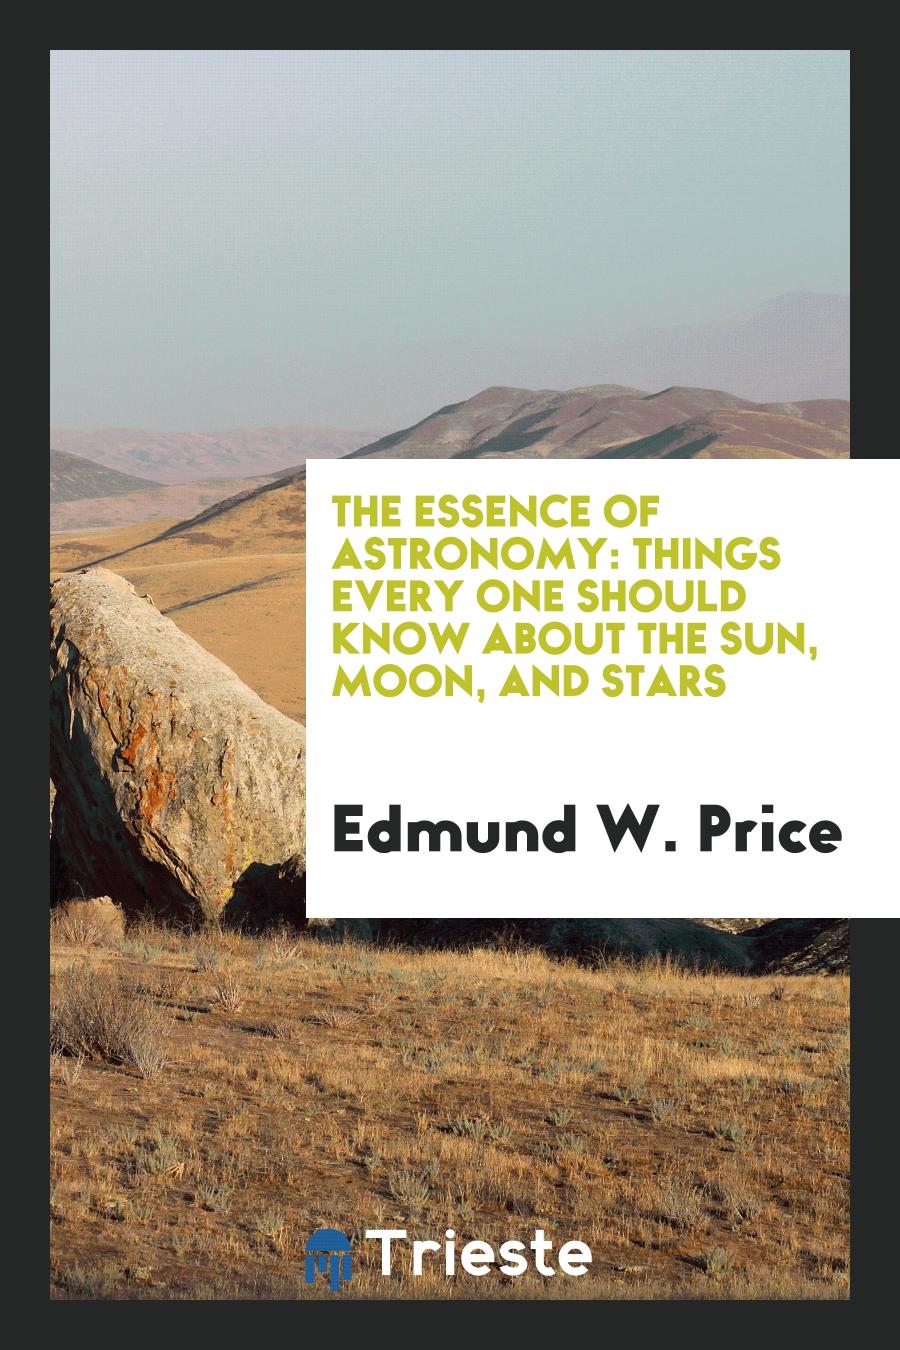 Edmund W. Price - The Essence of Astronomy: Things Every One Should Know About the Sun, Moon, and Stars